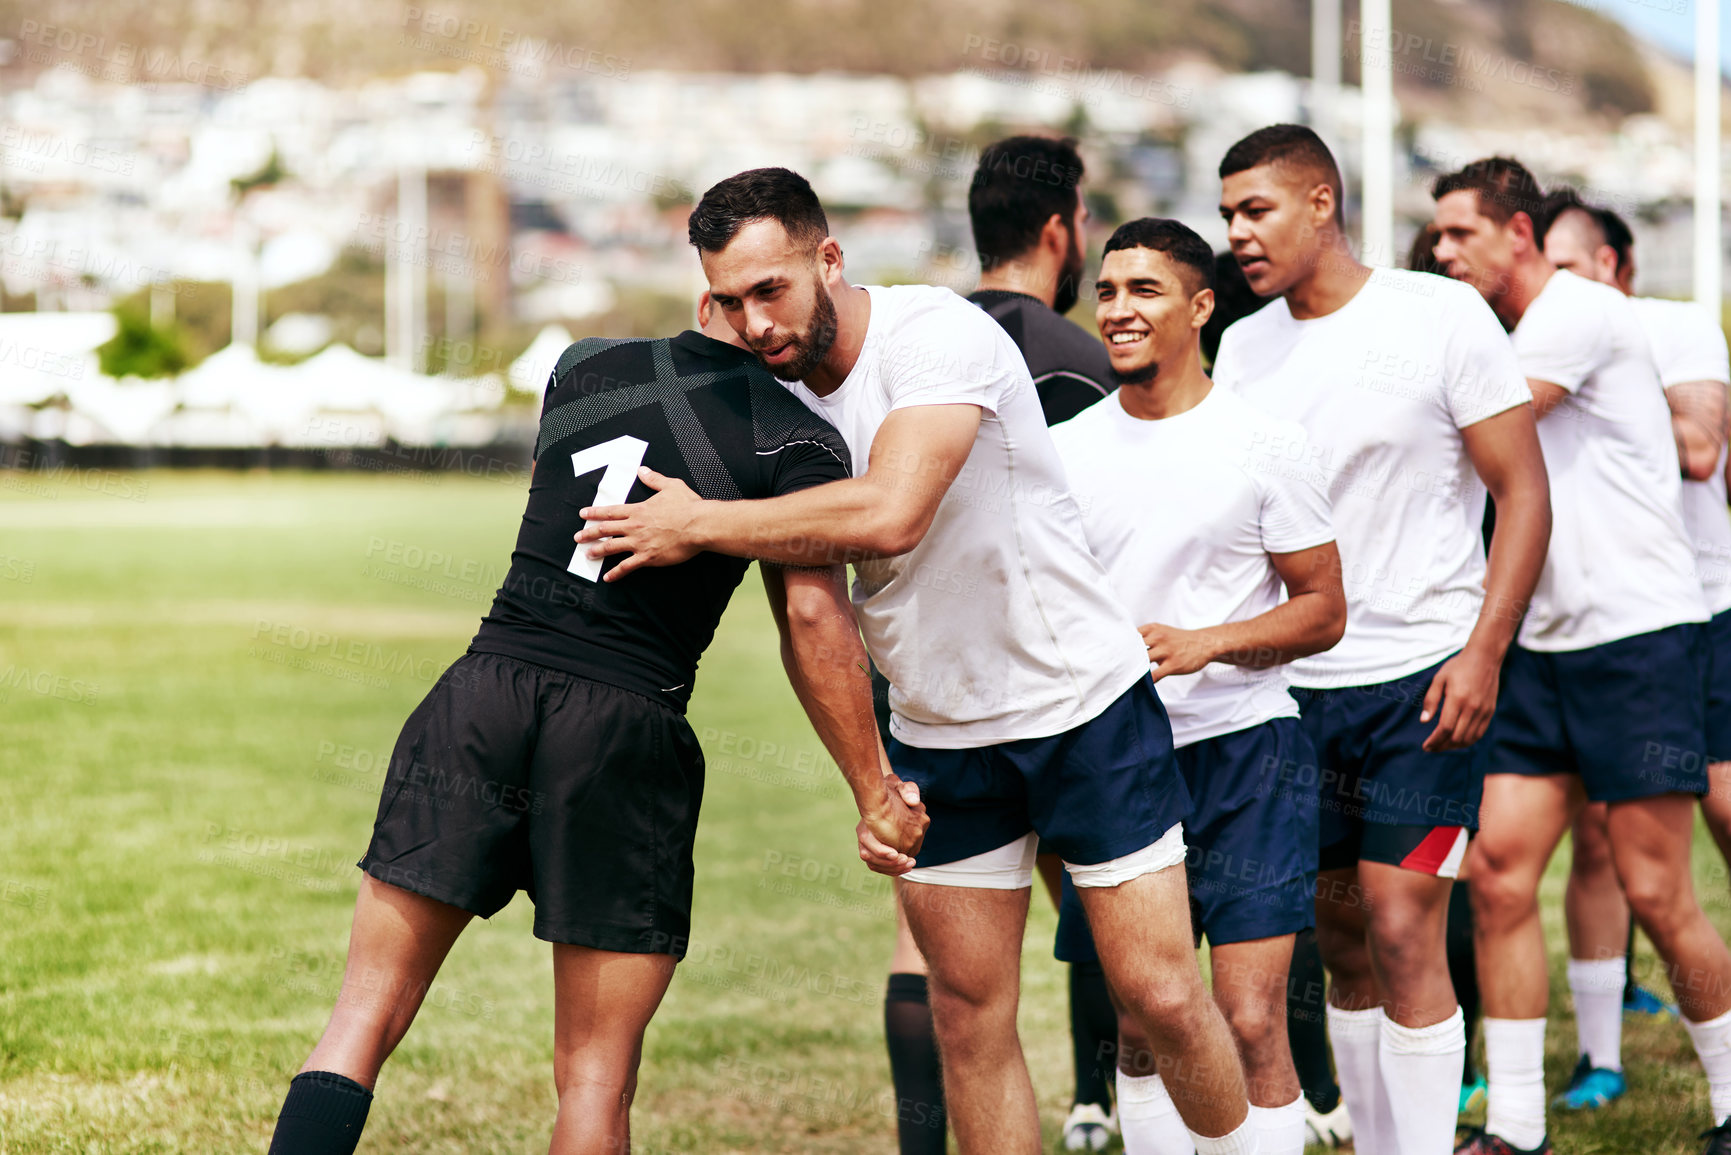 Buy stock photo Shot of a group of young men shaking hands during a game of rugby